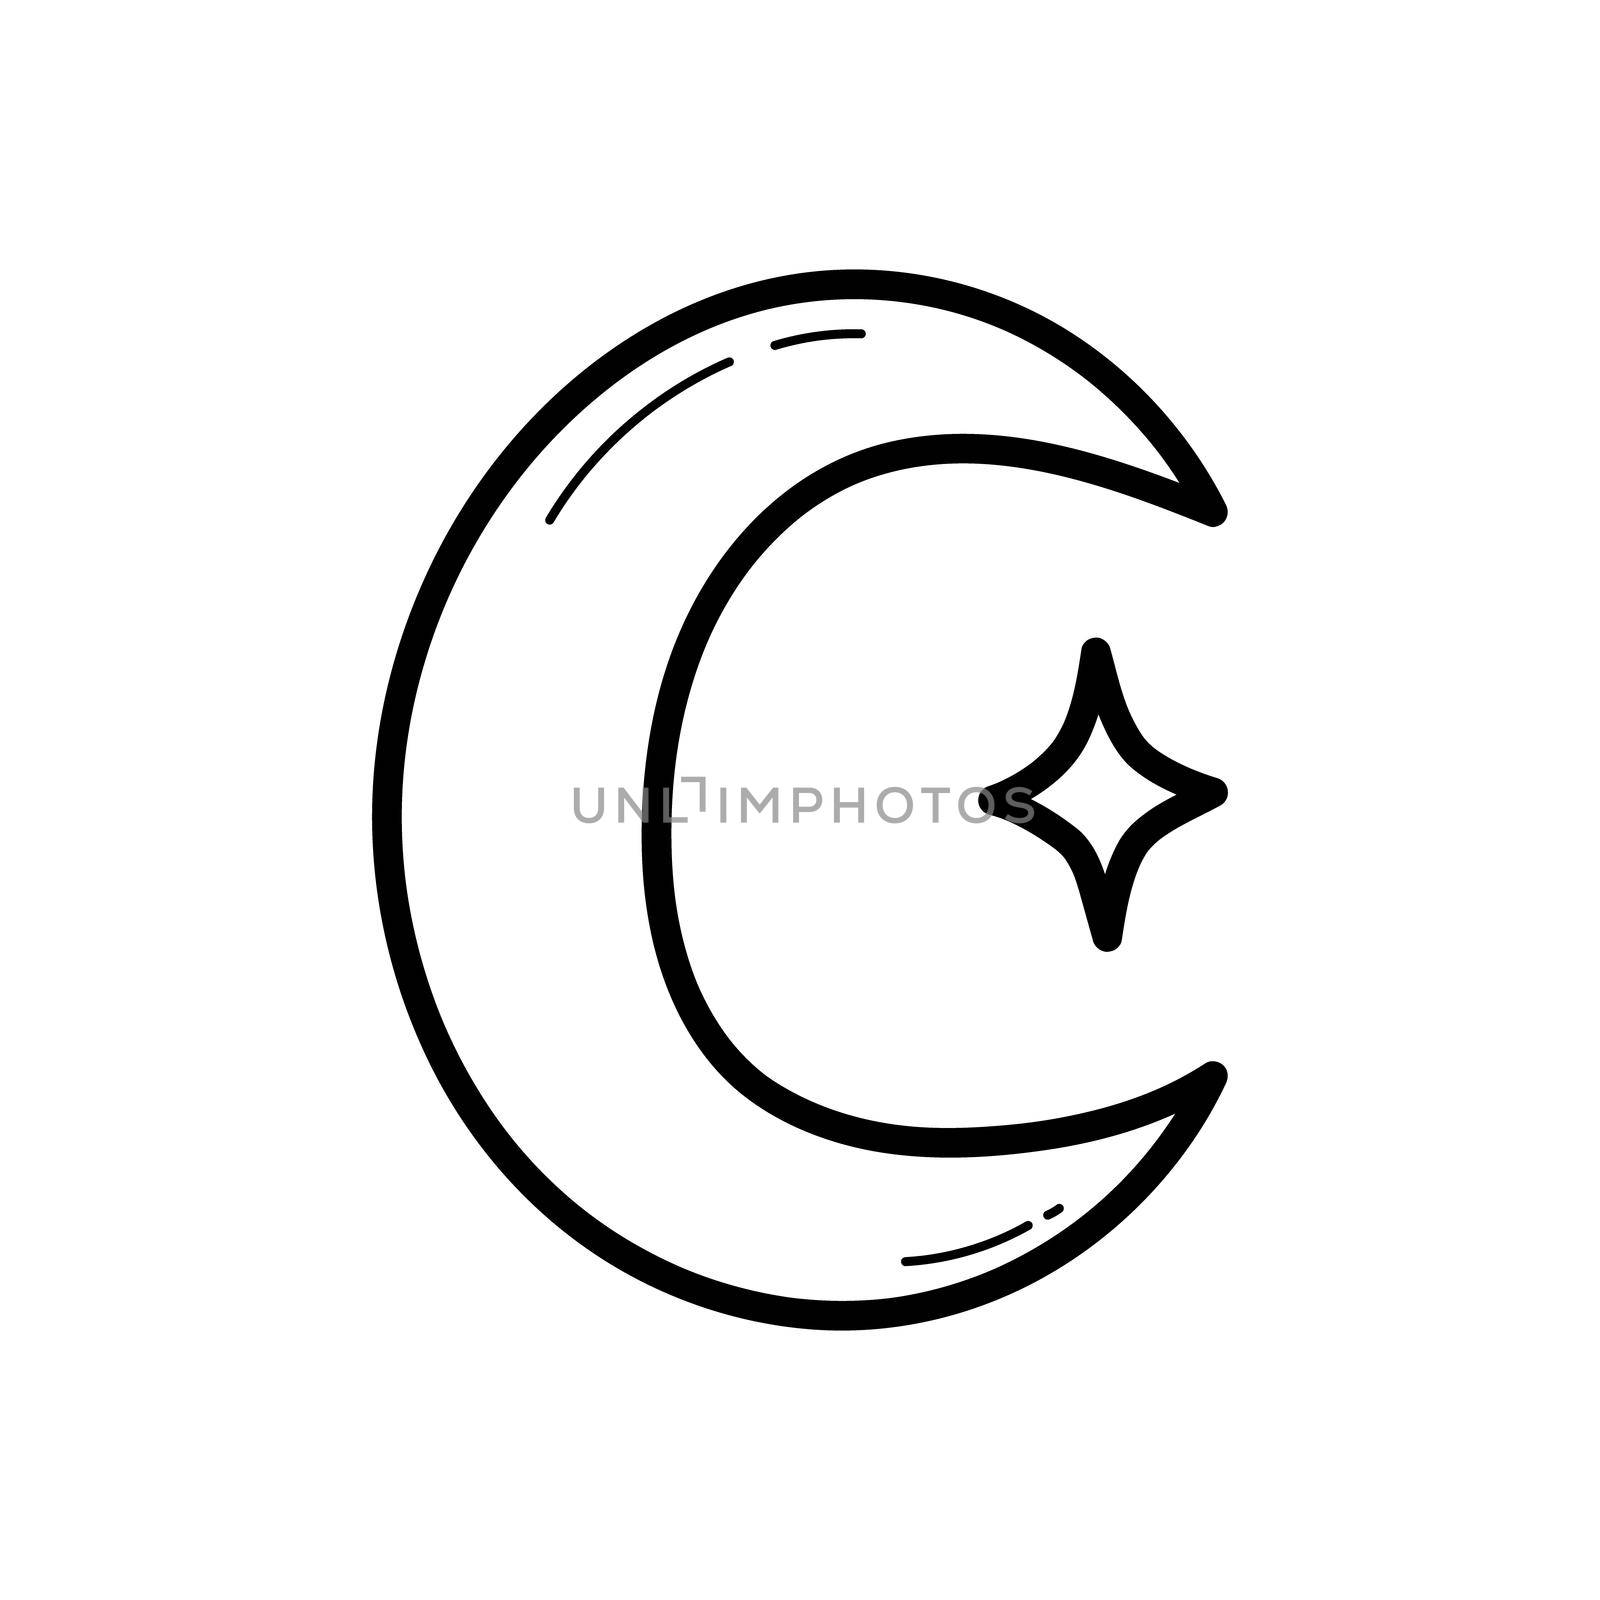 Moon with star. Mystical element, ethnic hand-drawn doodle icon. Single element. Vector illustration for modern designs, prints, posters. Outline